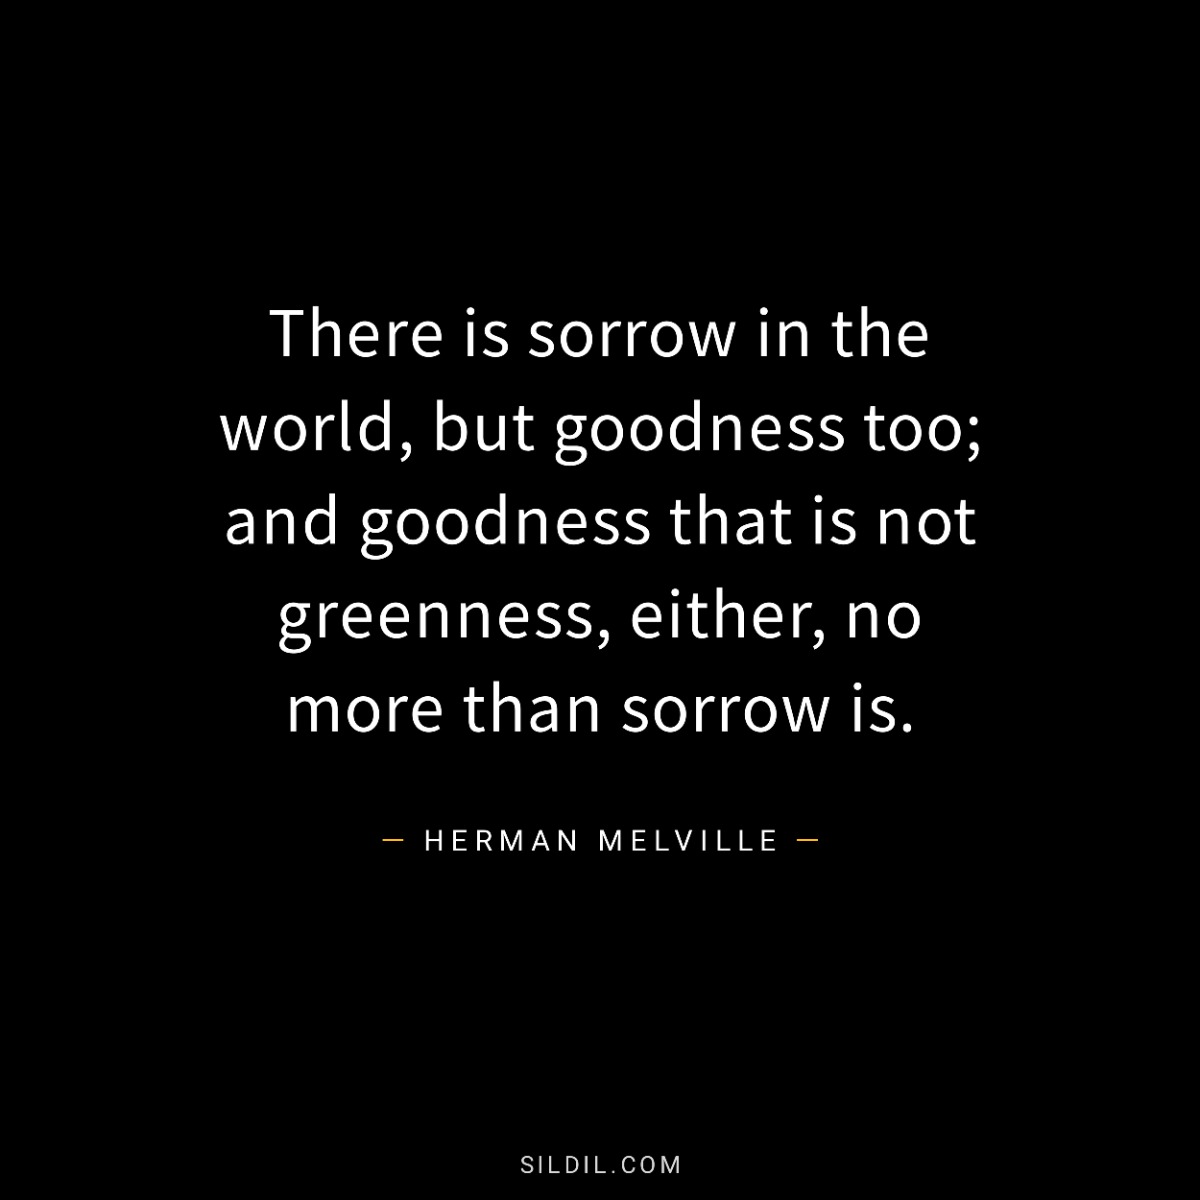 There is sorrow in the world, but goodness too; and goodness that is not greenness, either, no more than sorrow is.